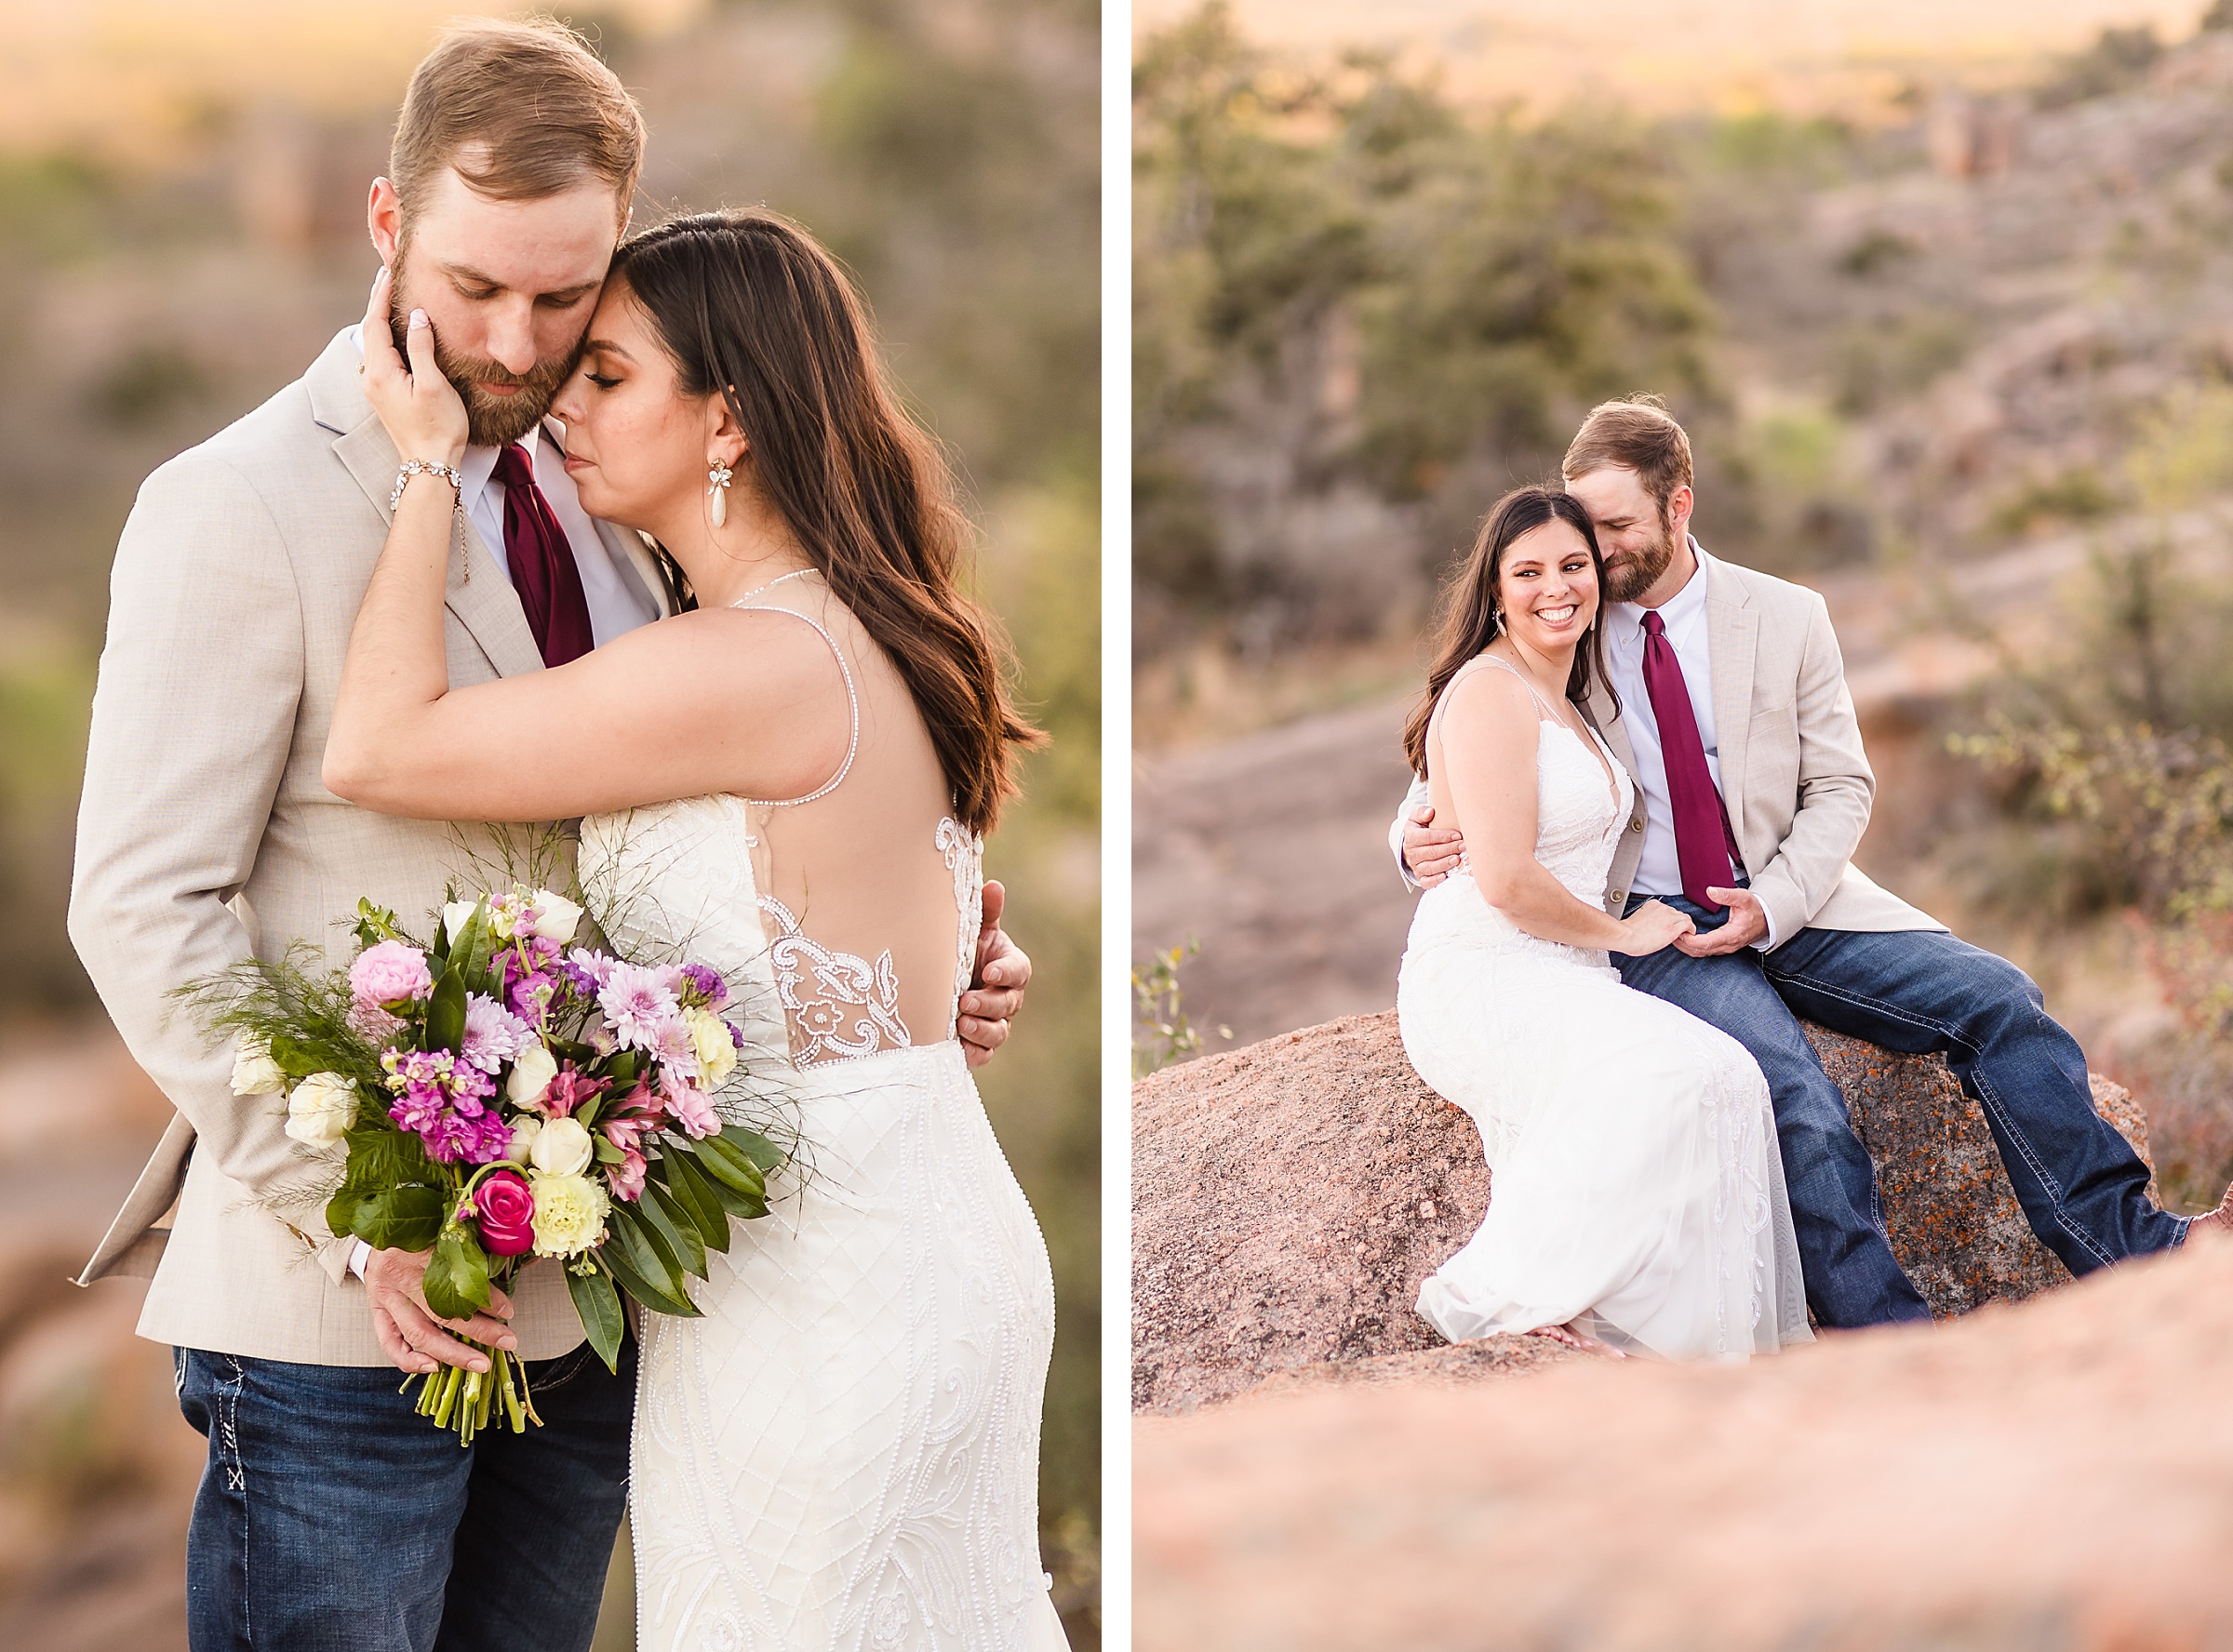 Couple celebrate their Anniversary at Enchanted Rock in Fredericksburg, Texas. Photograph taken by Austin Wedding Photographers, Joanna and Brett Photography